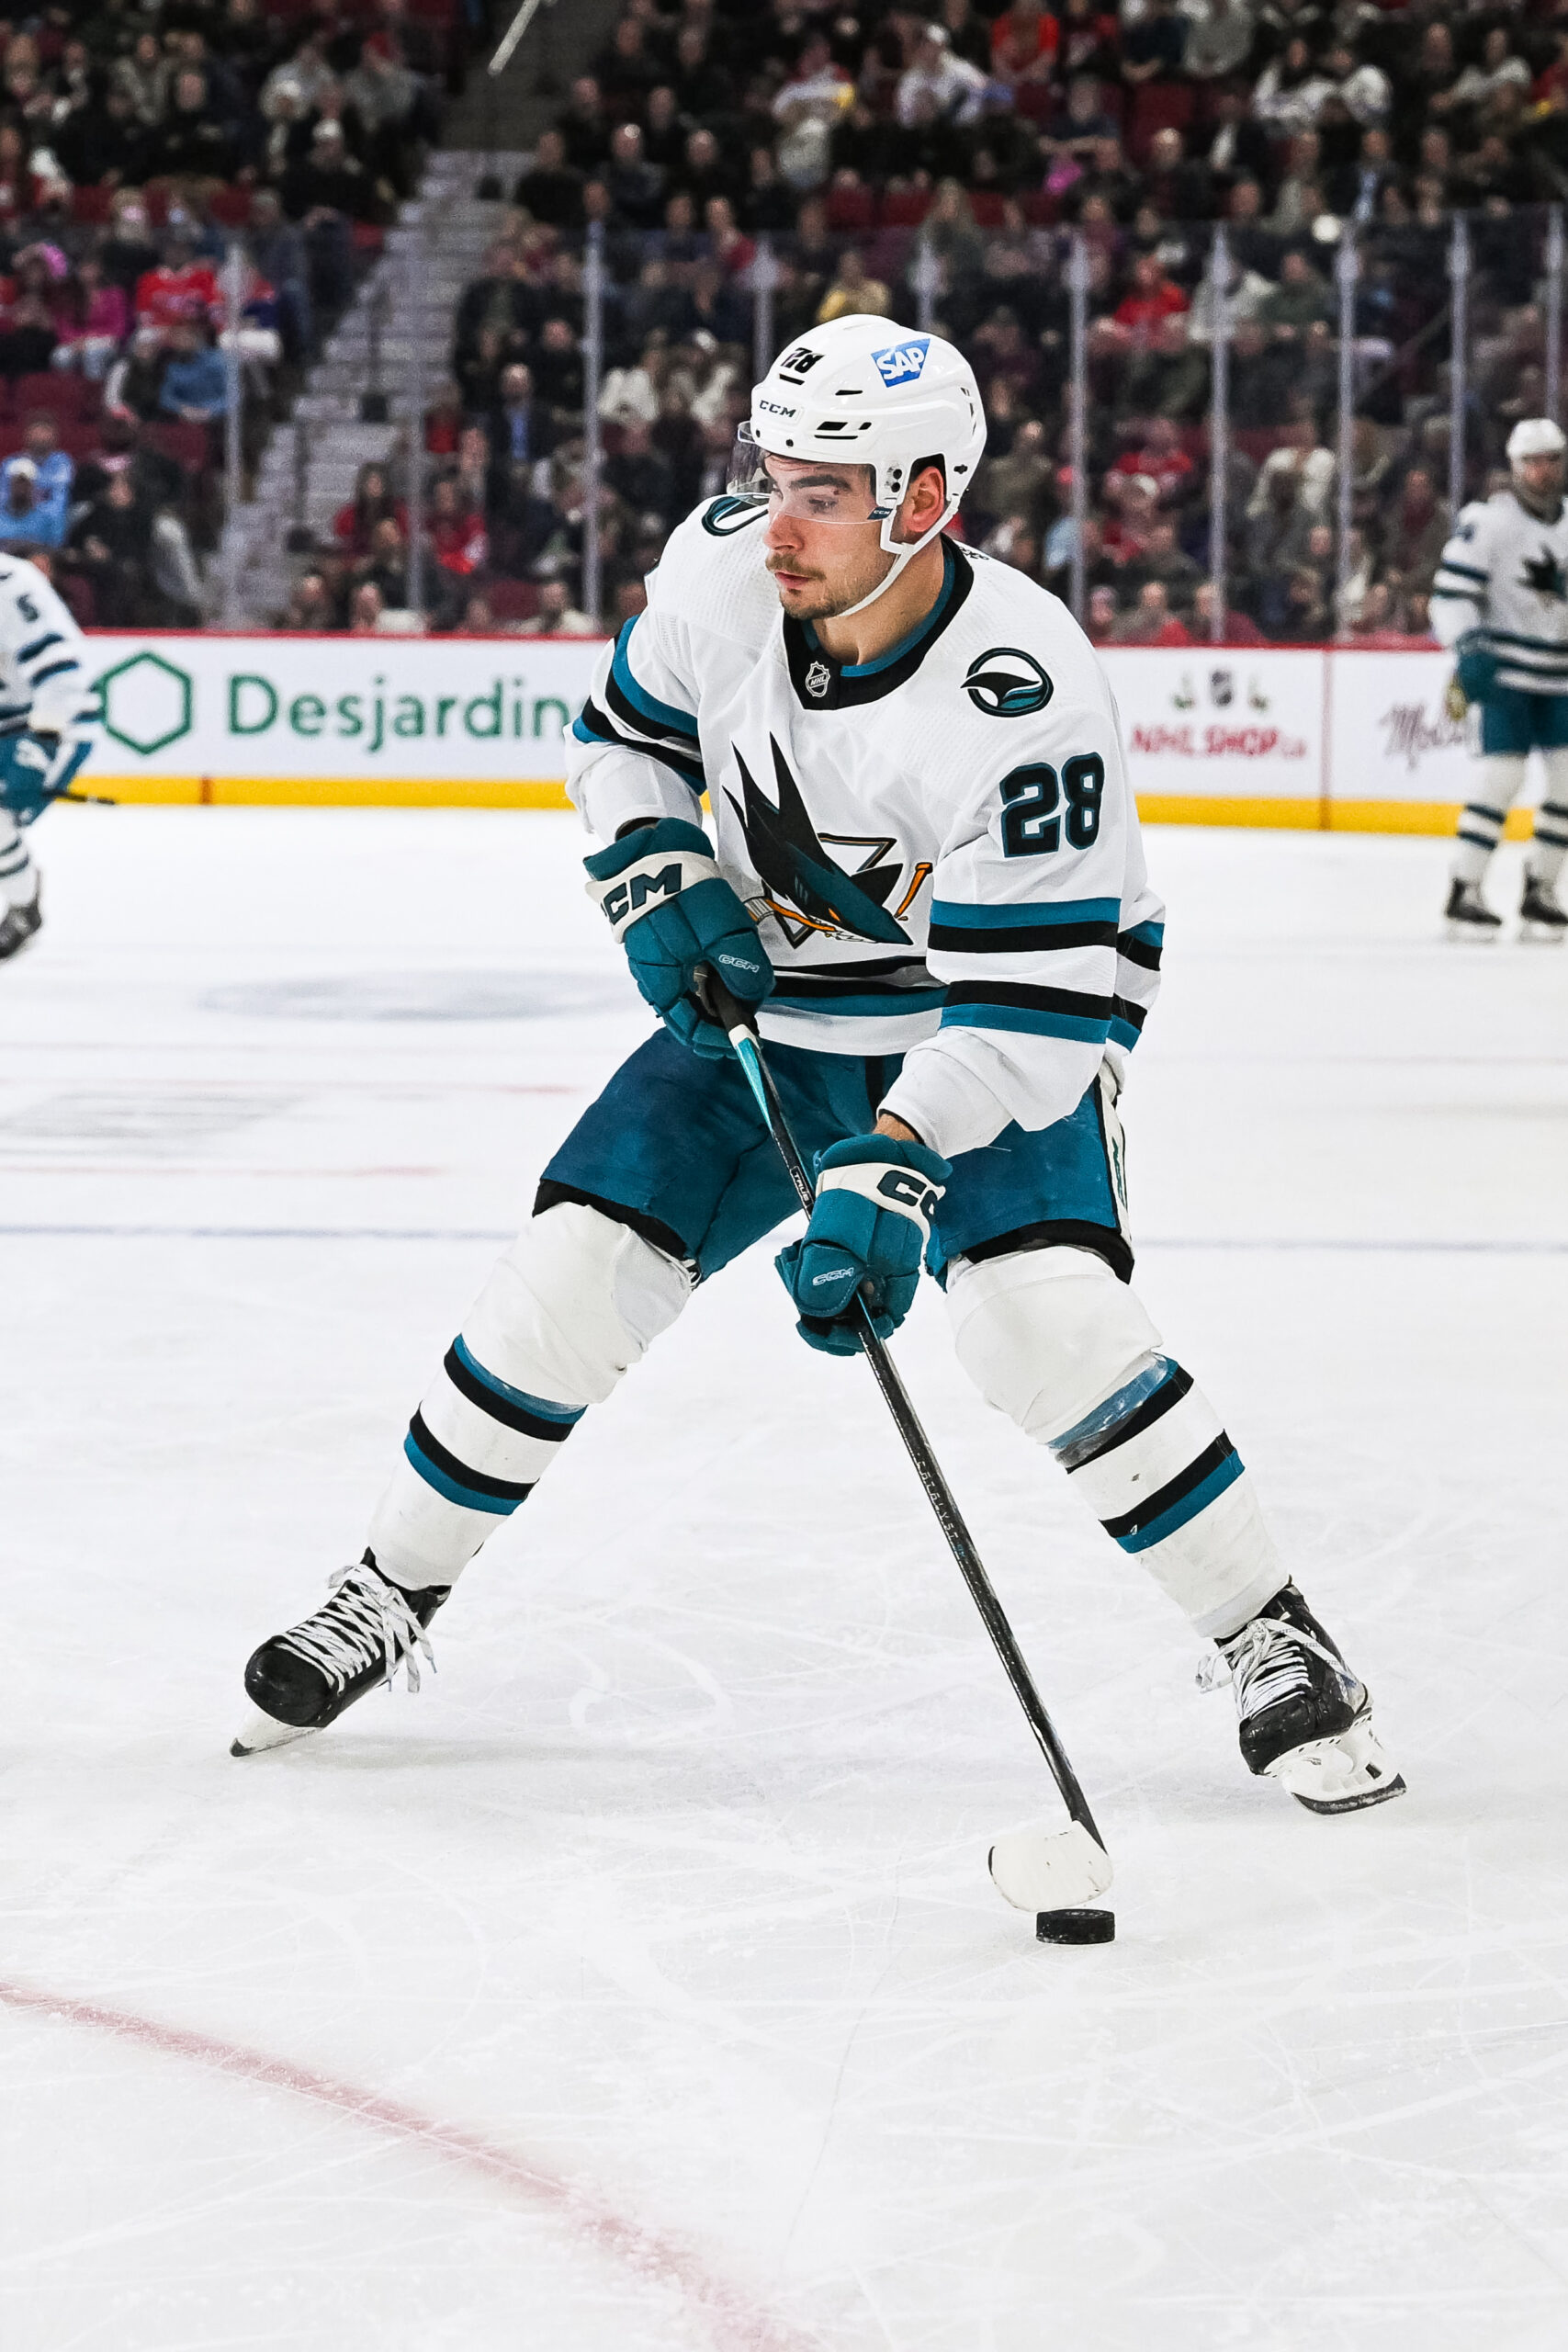 Devils File Team-Elected Arbitration with Timo Meier - New Jersey Hockey Now